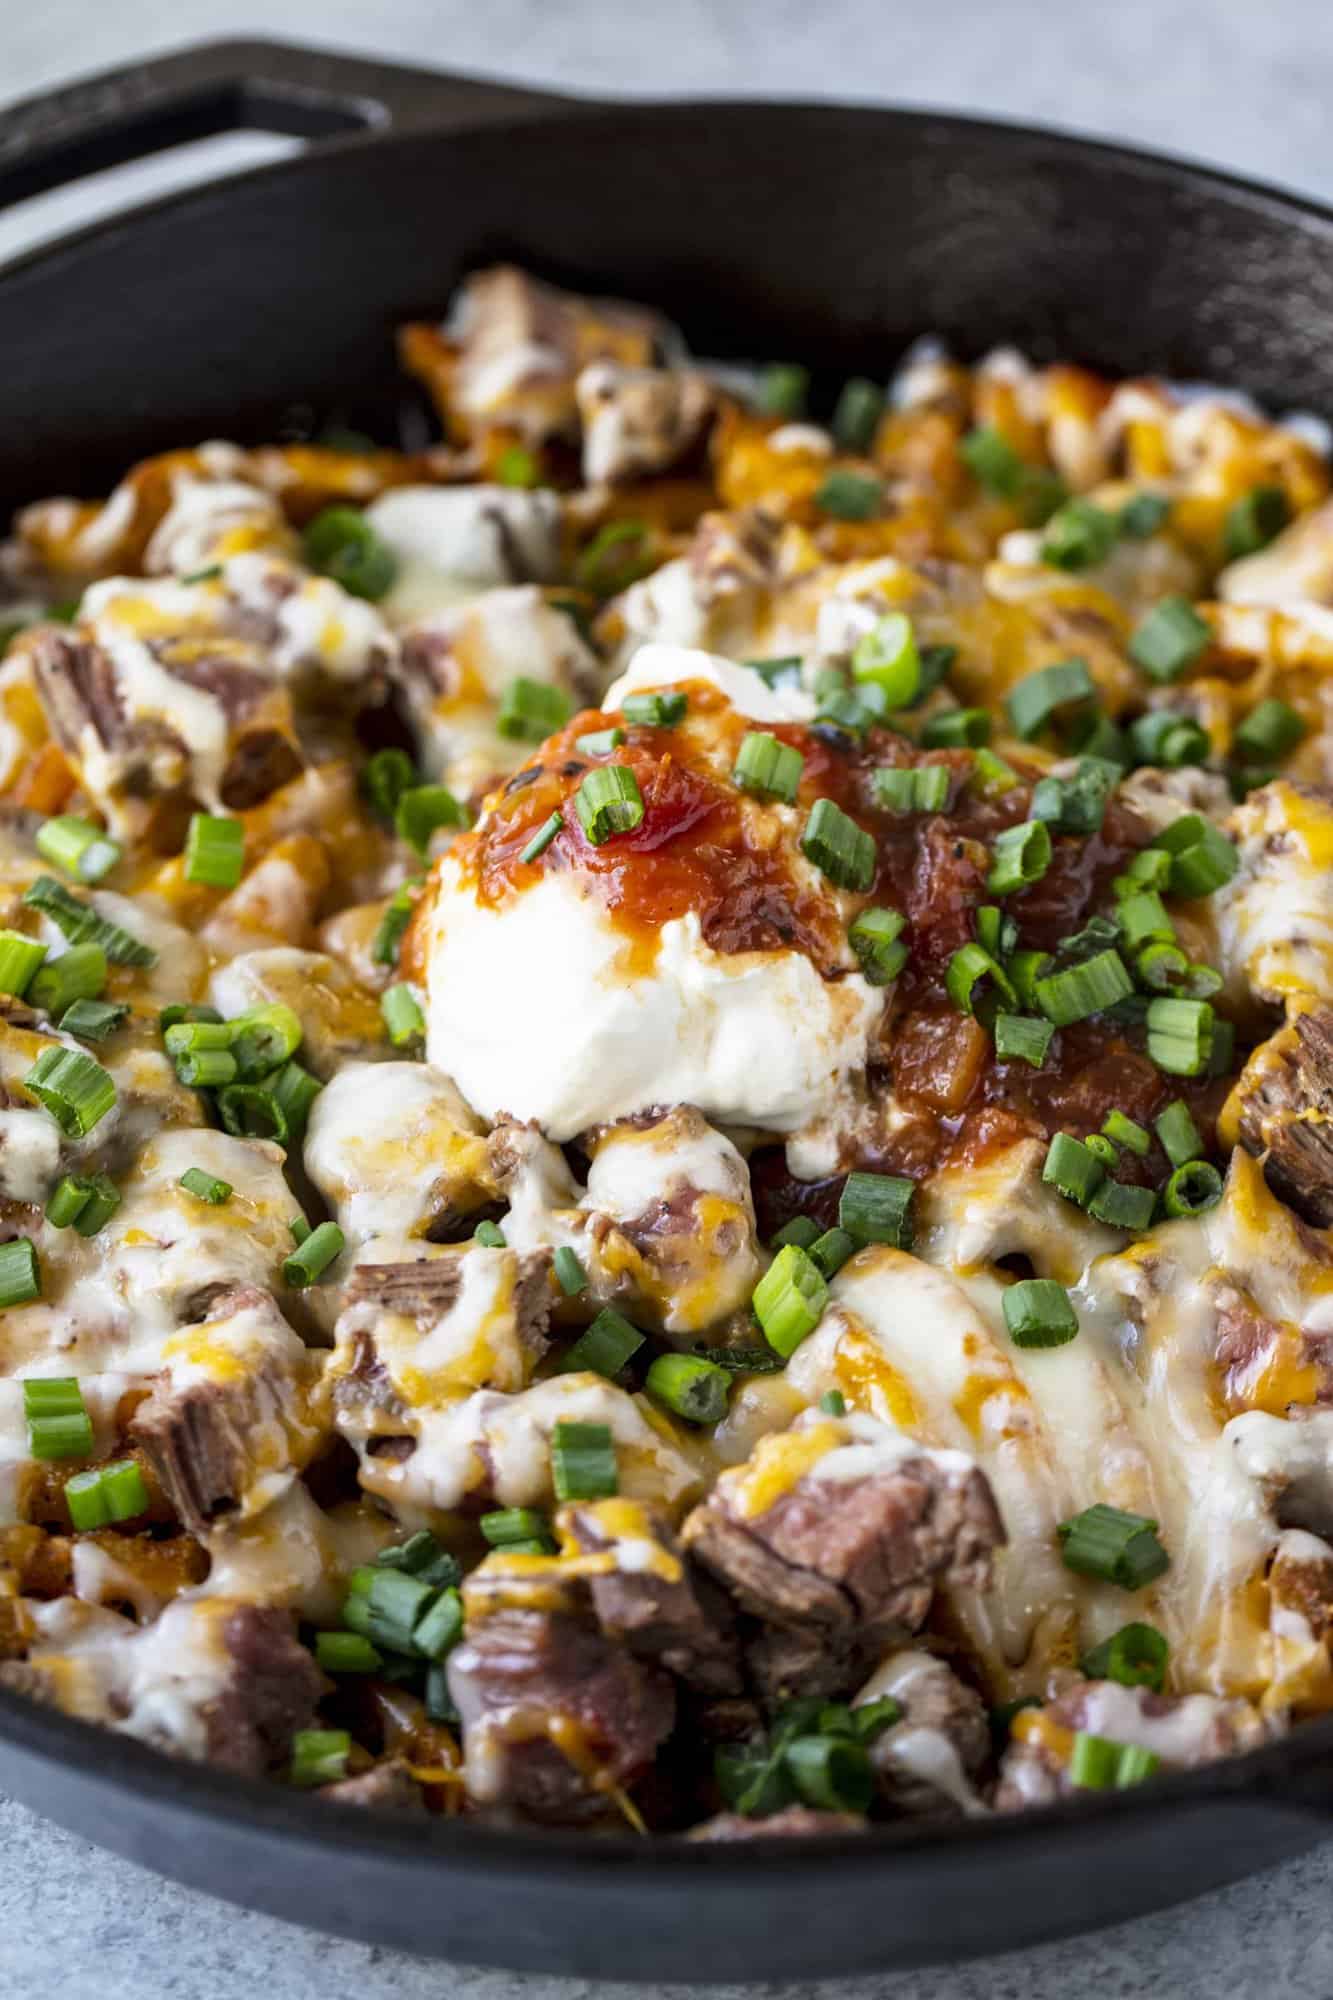 Steak and Potato Nachos combine three of your favorite comfort foods into one amazing and indulgent skillet dish. Eat it as a drool-worthy appetizer, or as a hearty and full dinner.